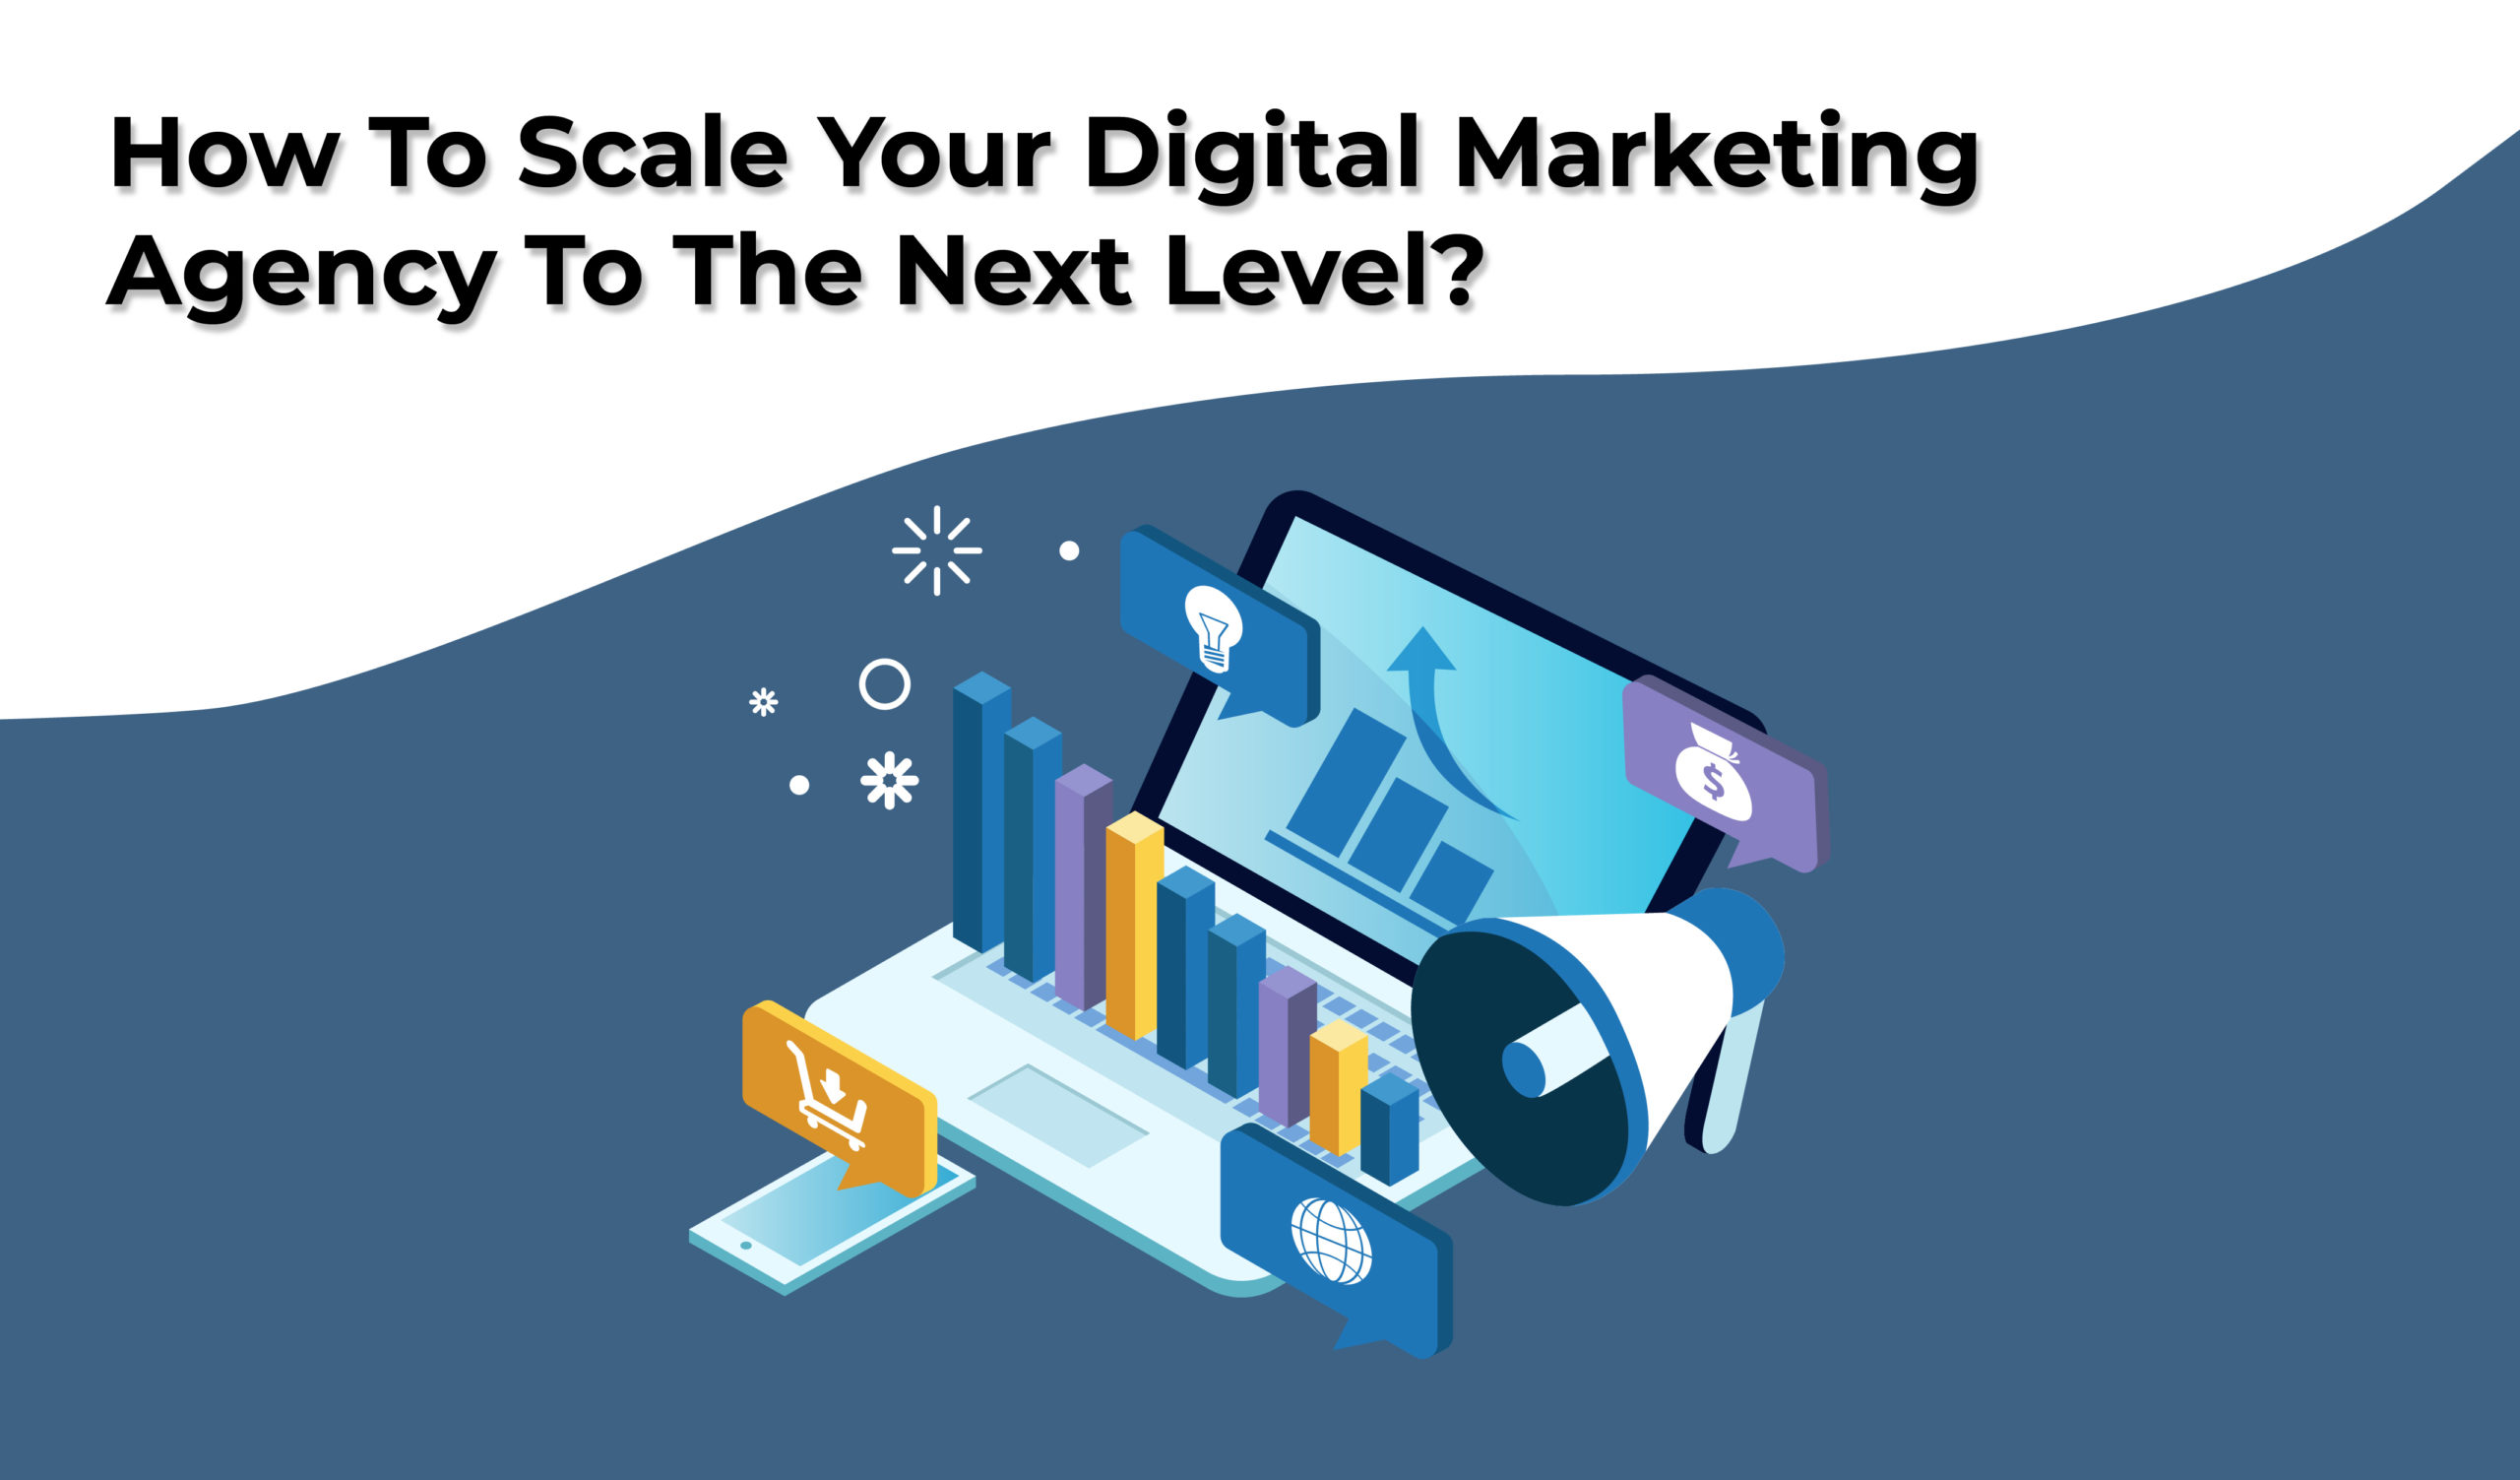 How to scale your digital marketing agency to the next level?